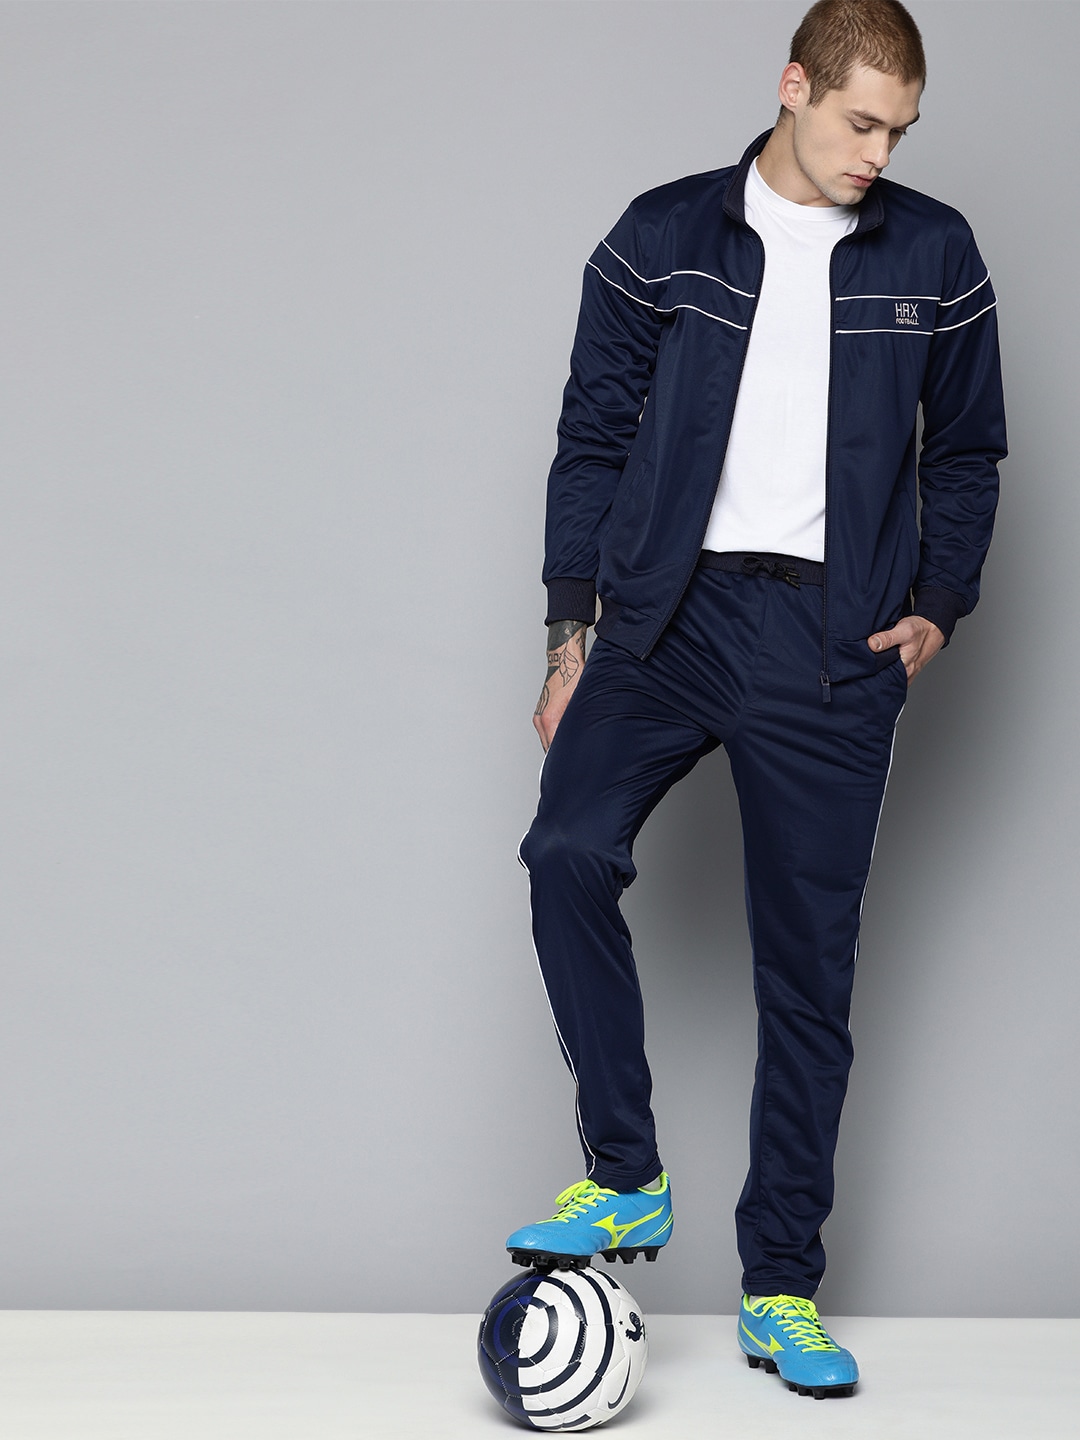 Clothing Tracksuits | HRX by Hrithik Roshan Men Navy Blue Solid Football Tracksuit - LF80302